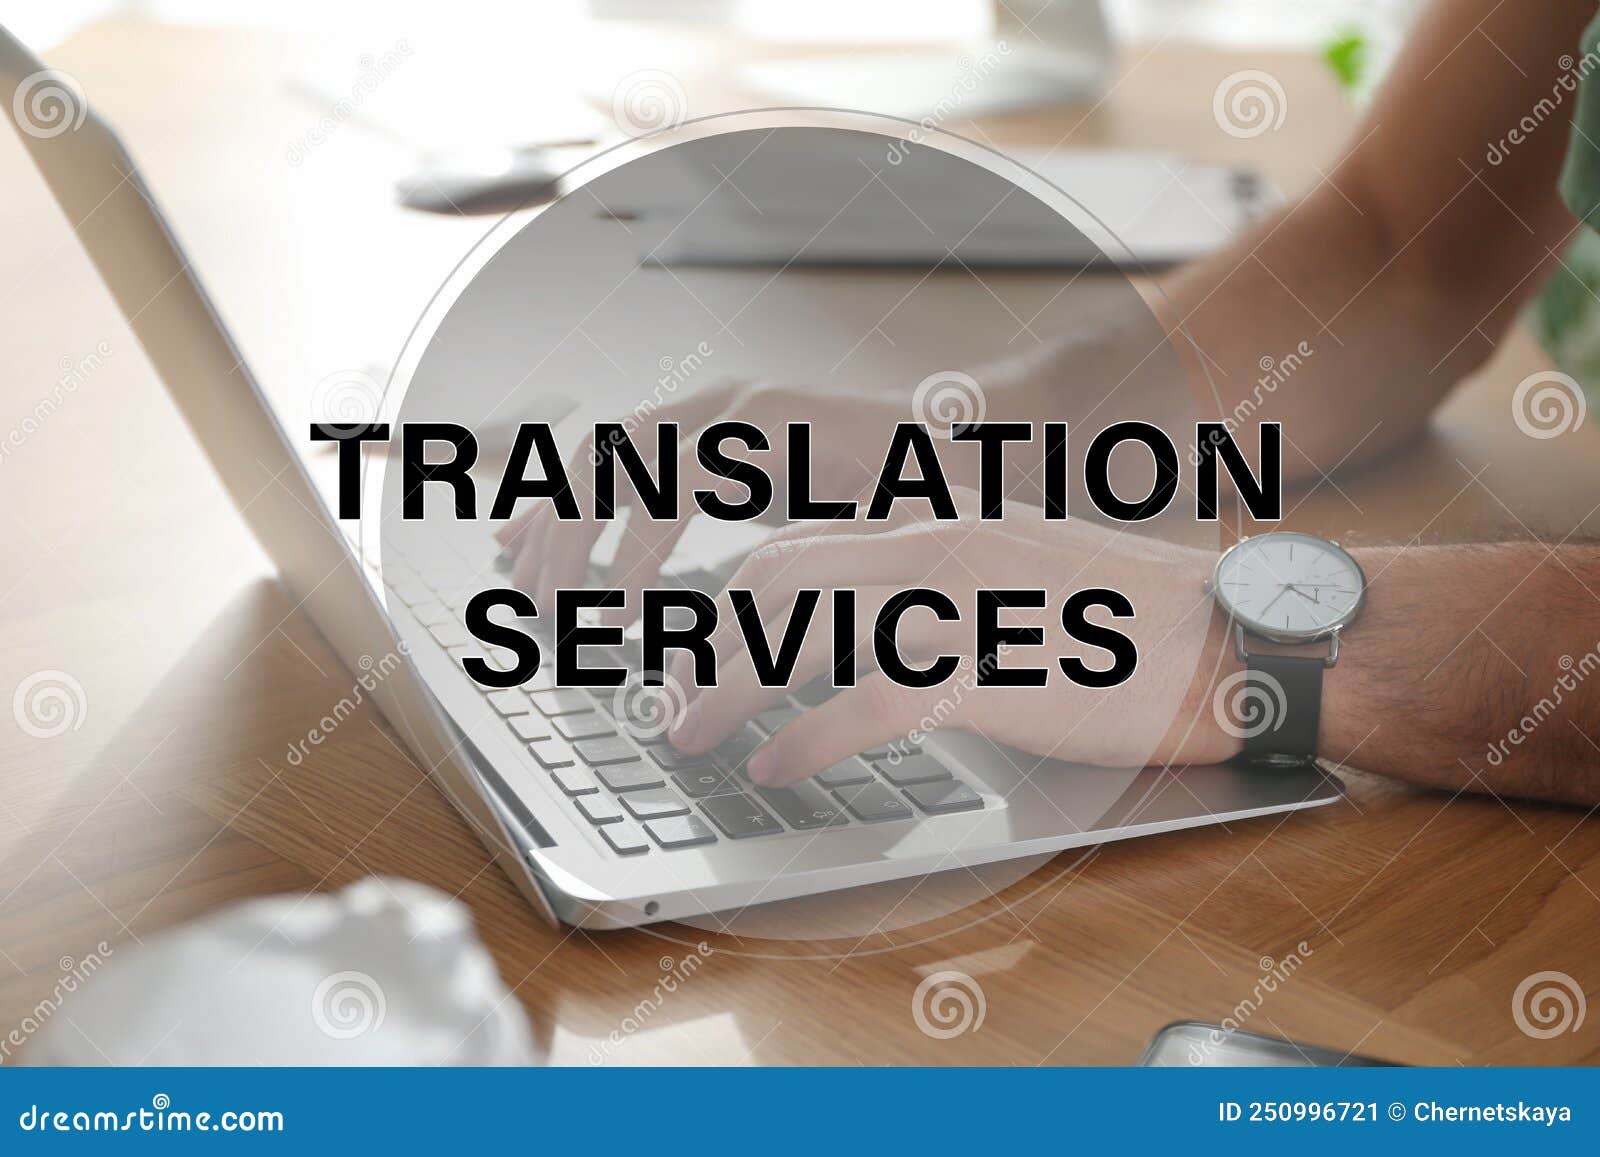 translation services. man working on laptop at table indoors, closeup